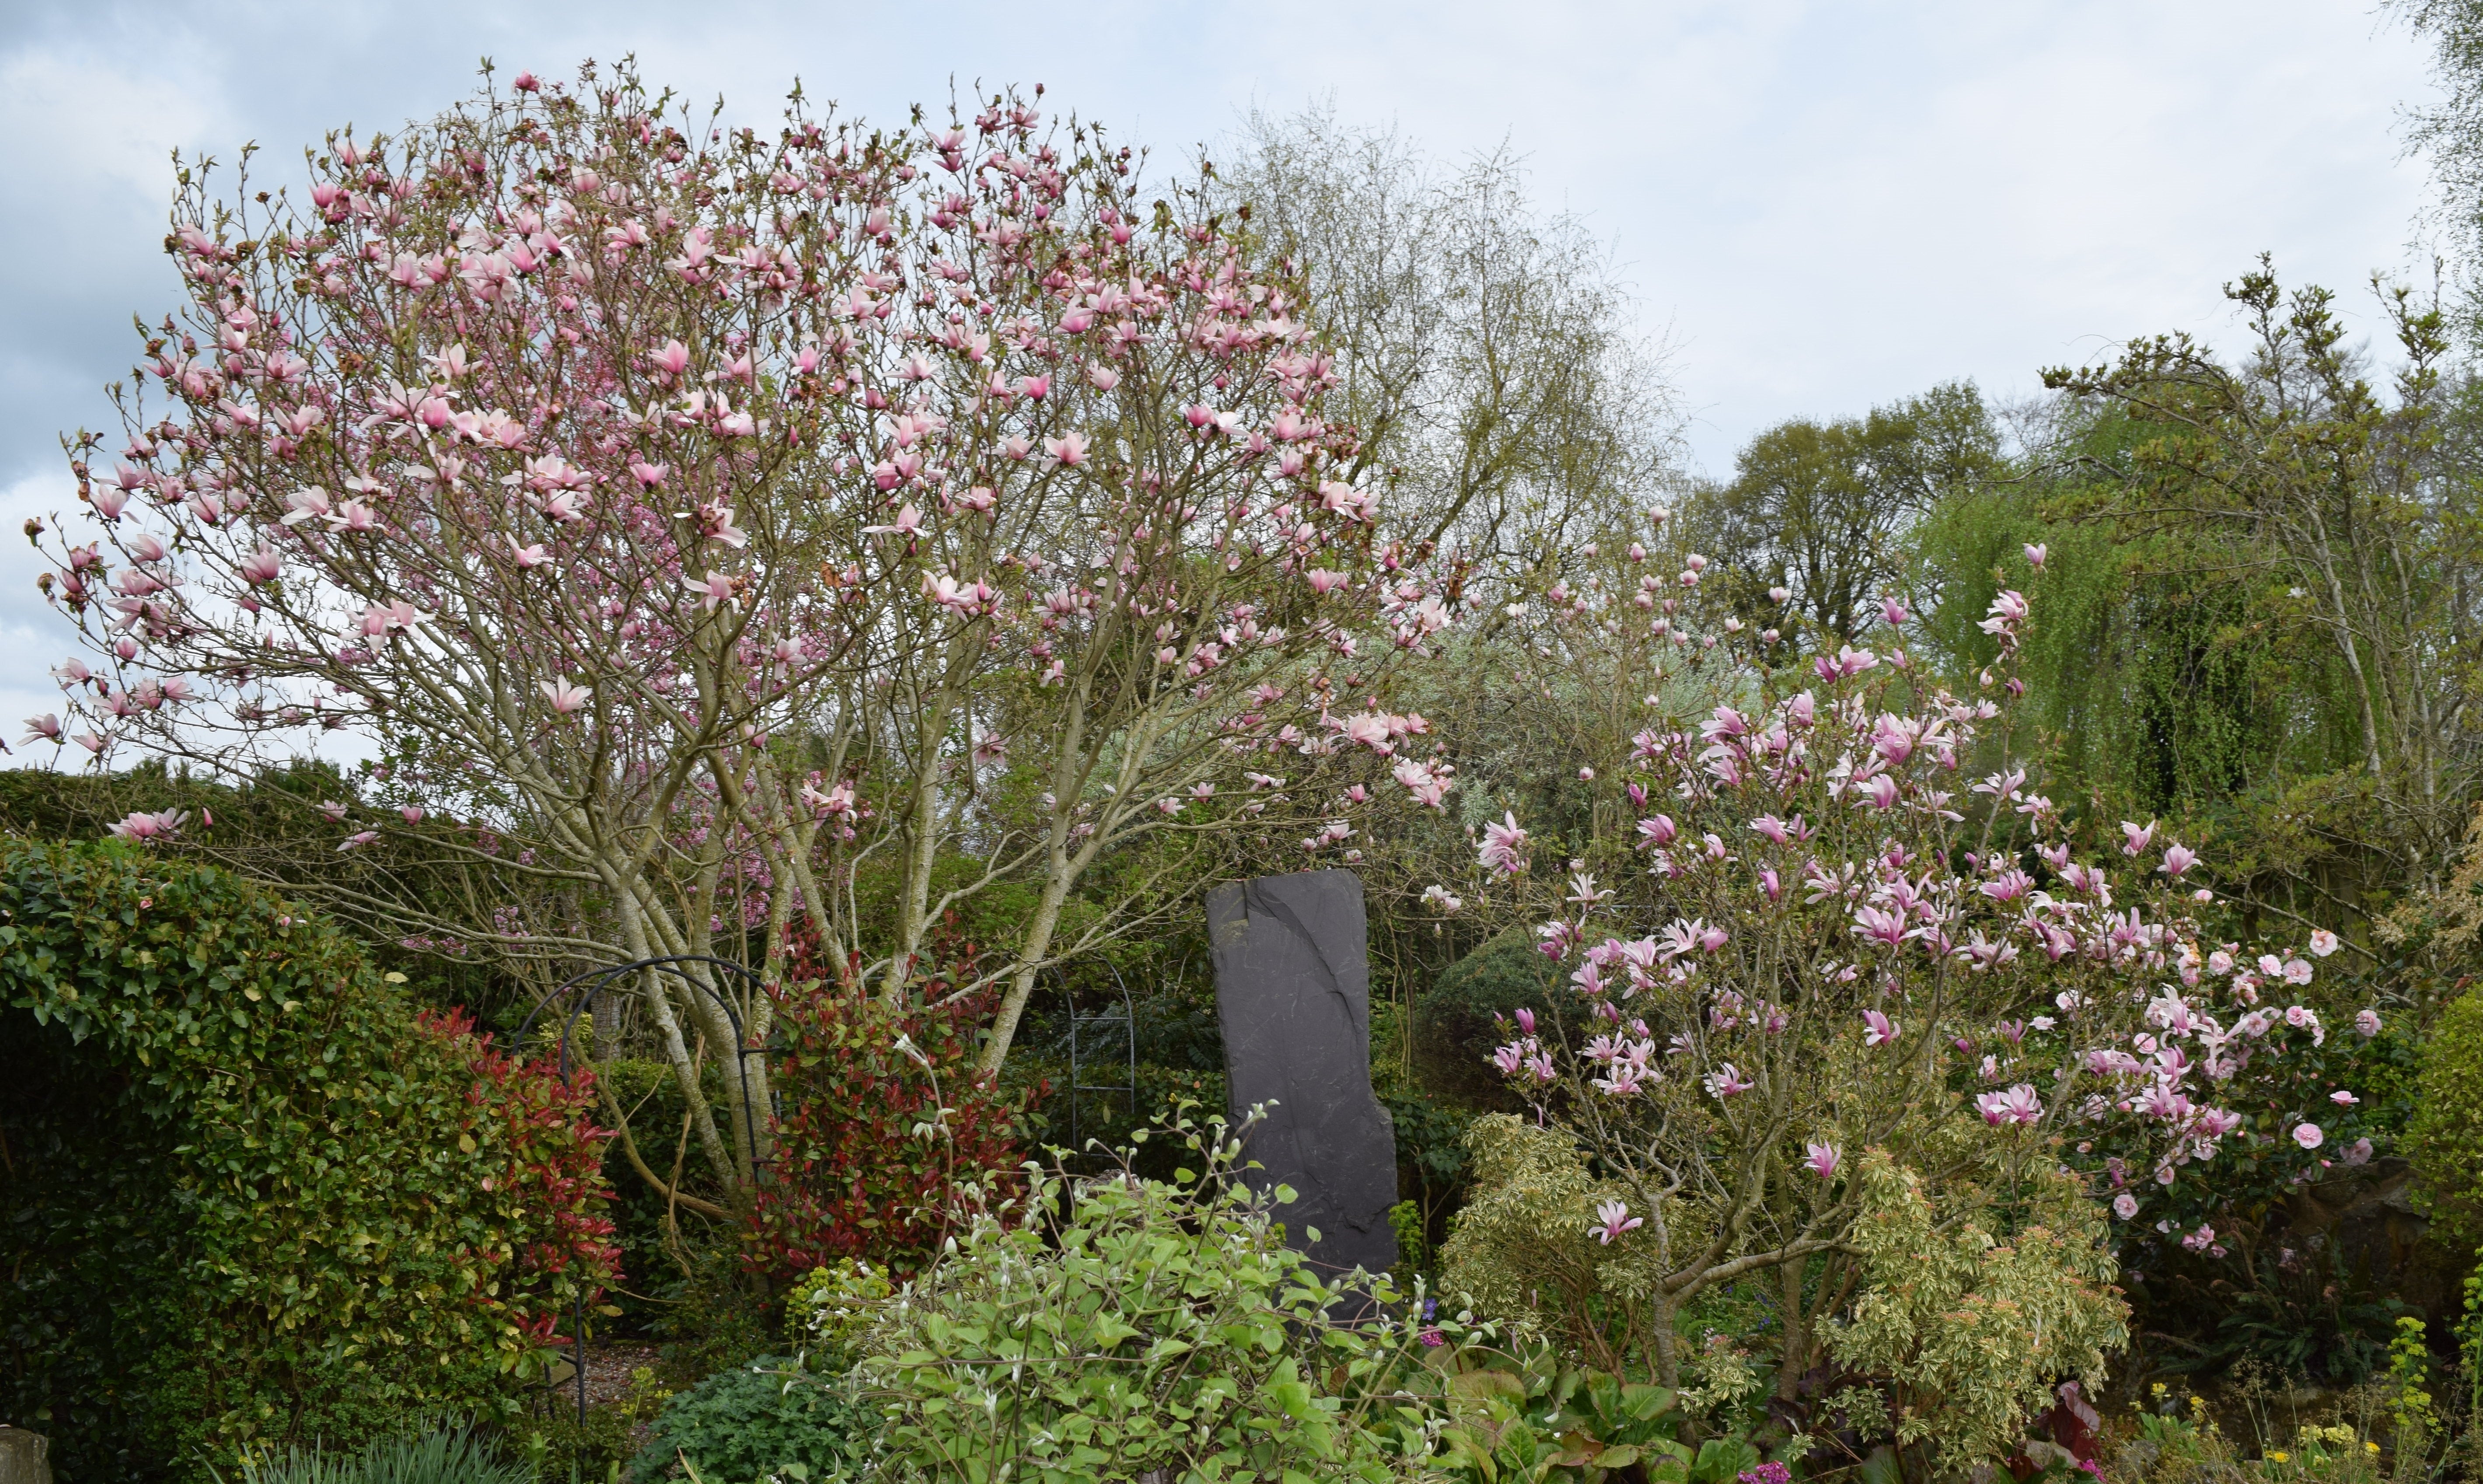 The magnolias unfurled their plush pink candles / As startling in daylight as fireworks at night